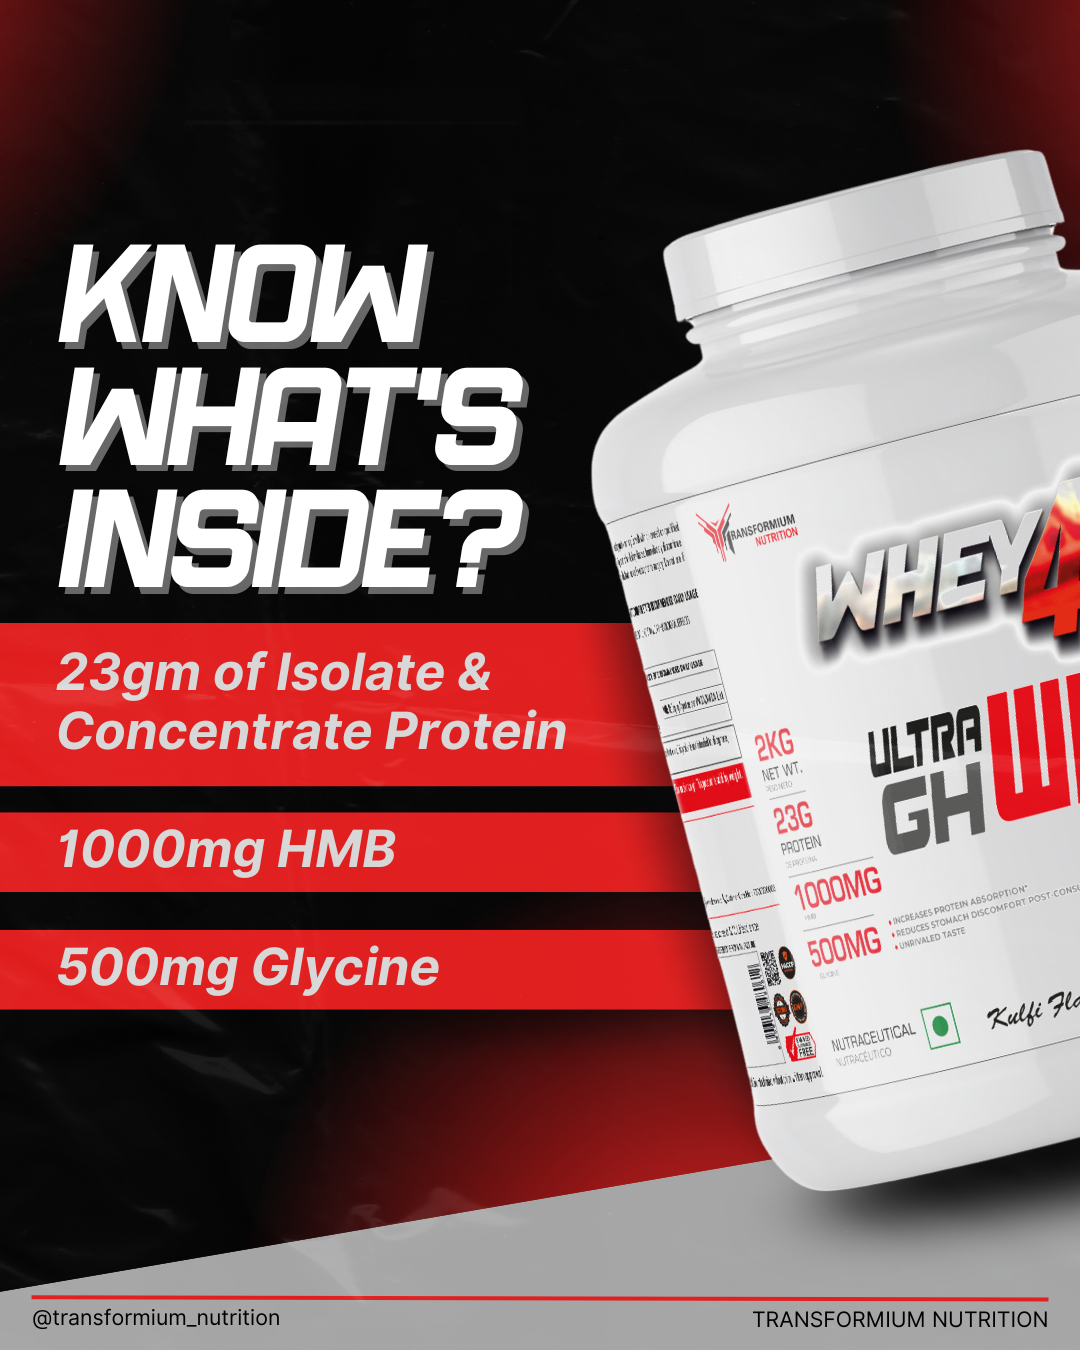 Ultra GH Whey (Enhances Natural GH Levels With Goodness of Whey)